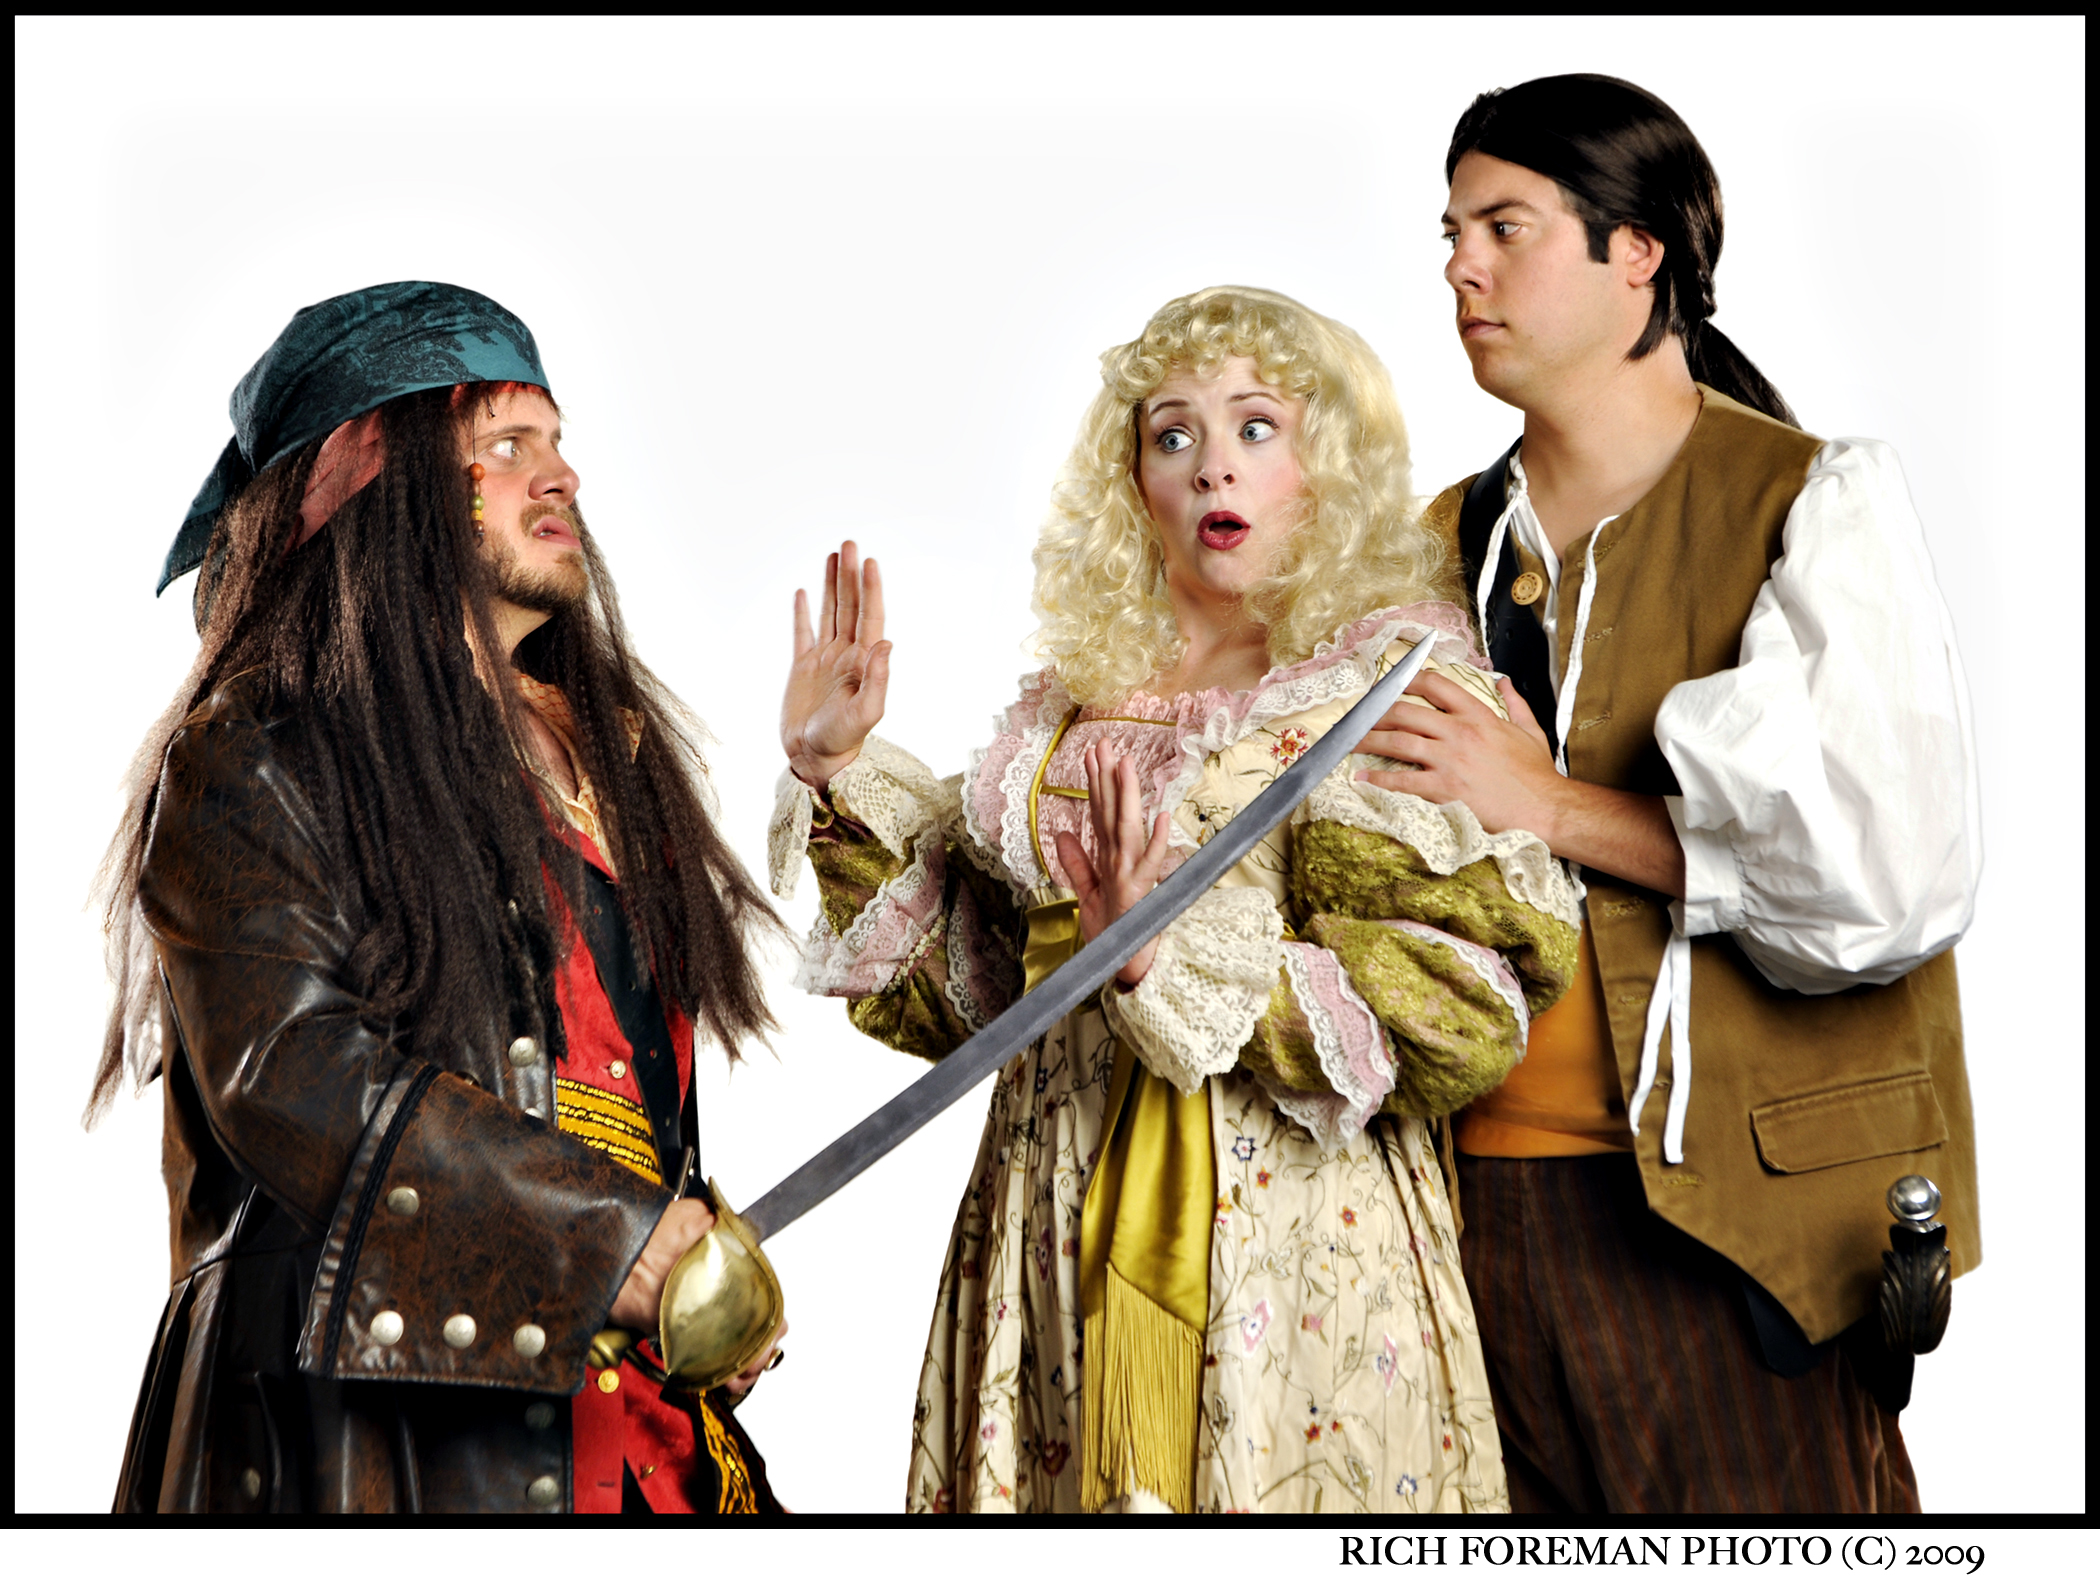  (L to R) Michael Cavalieri (The Pirate King), Alicia Berneche (Mabel) and Matthew Giebel (Frederic) star in Light Opera Works’ "The Pirates of Penzance." 